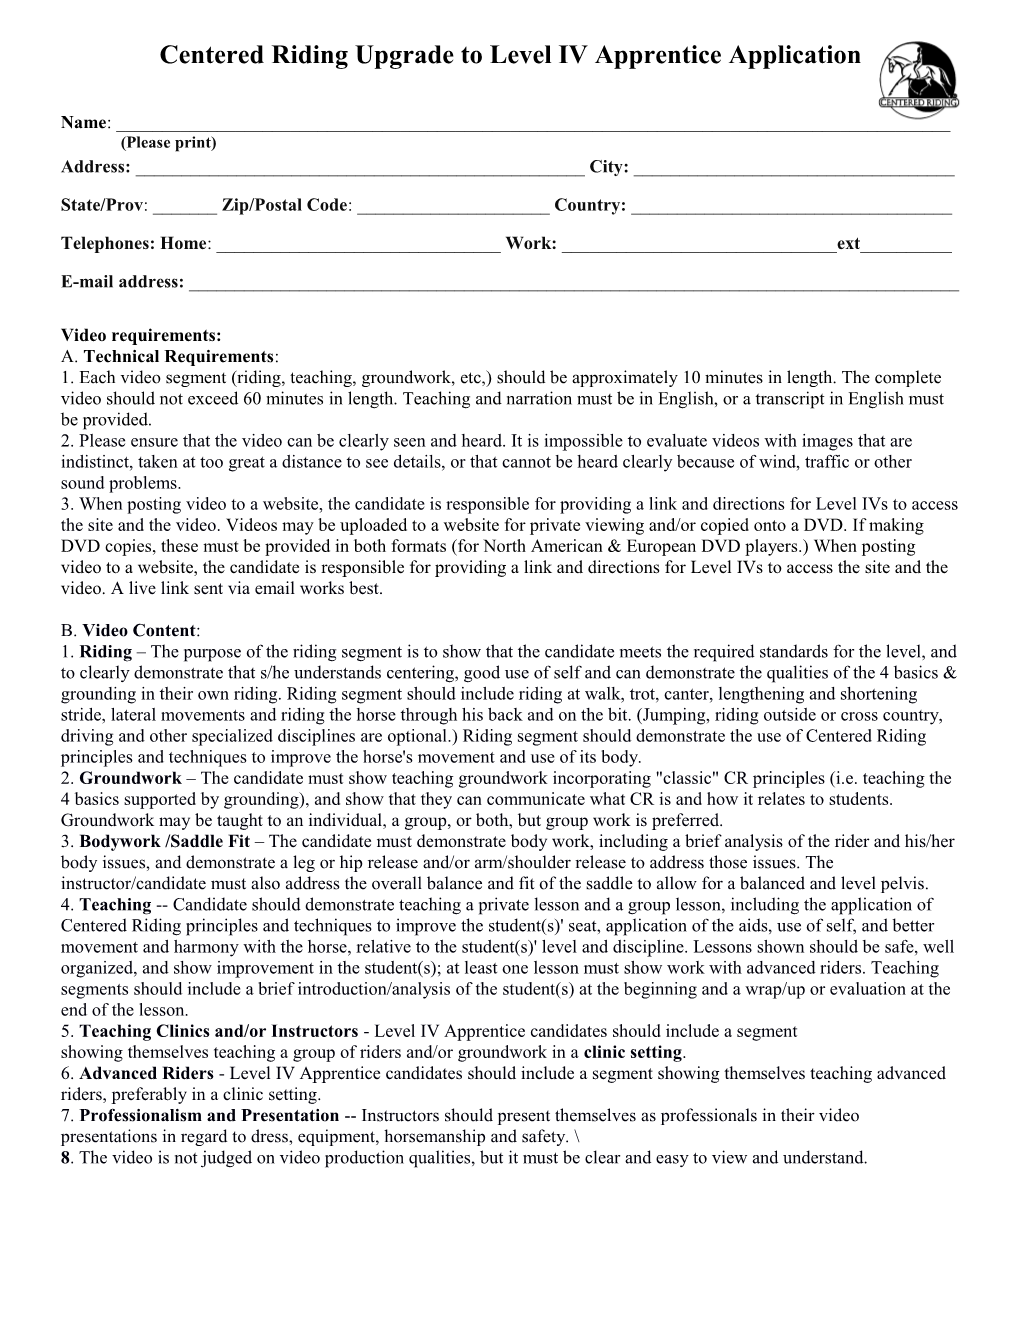 Application for Level II Centered Ridingâ Instructor